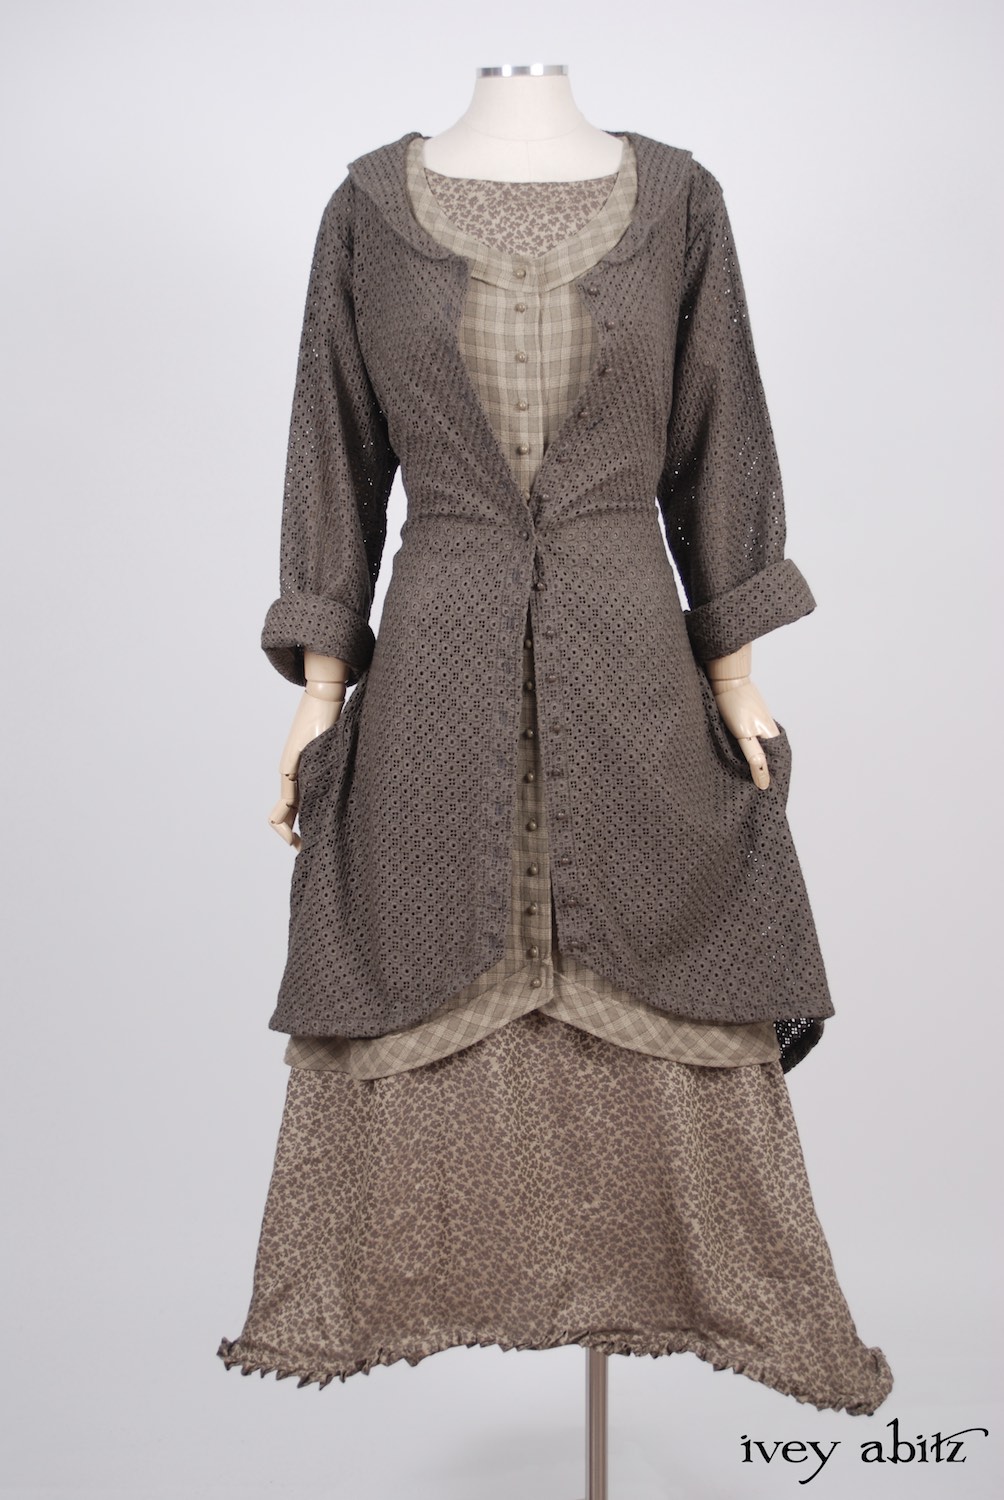 Ivey Abitz - Truitt Duster Coat in Flaxseed Embroidered Eyelet - Truitt Frock in Flaxseed Plaid Weave  - Mathilda Frock in Flaxseed Leafy Silk Linen, Low Water Length